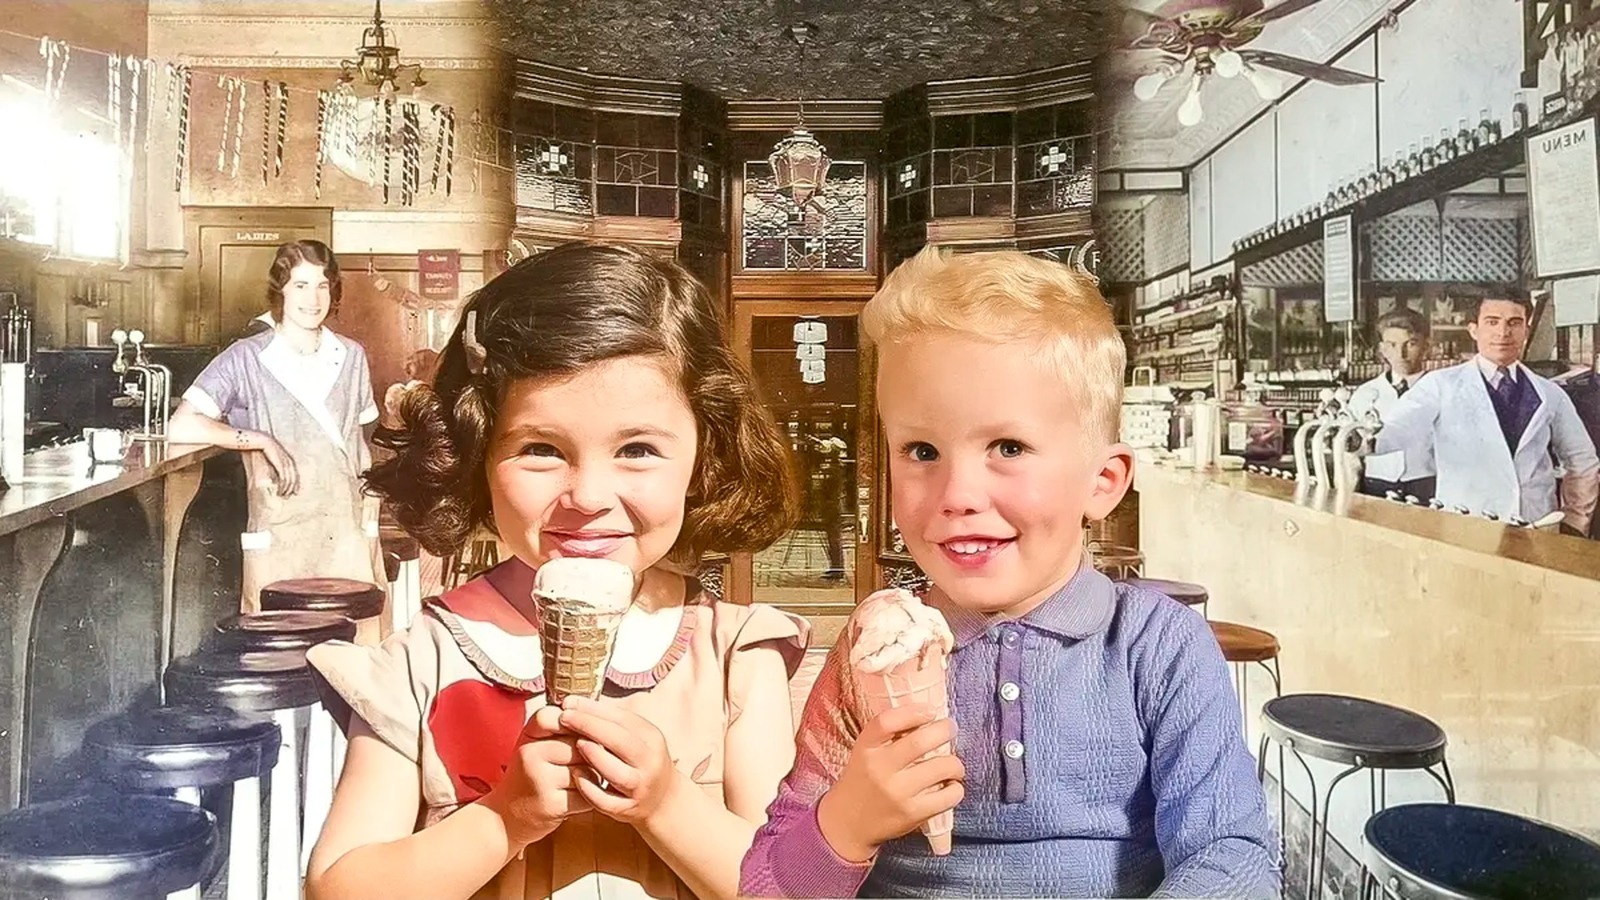 13 Oldest Ice Cream Parlors In The US